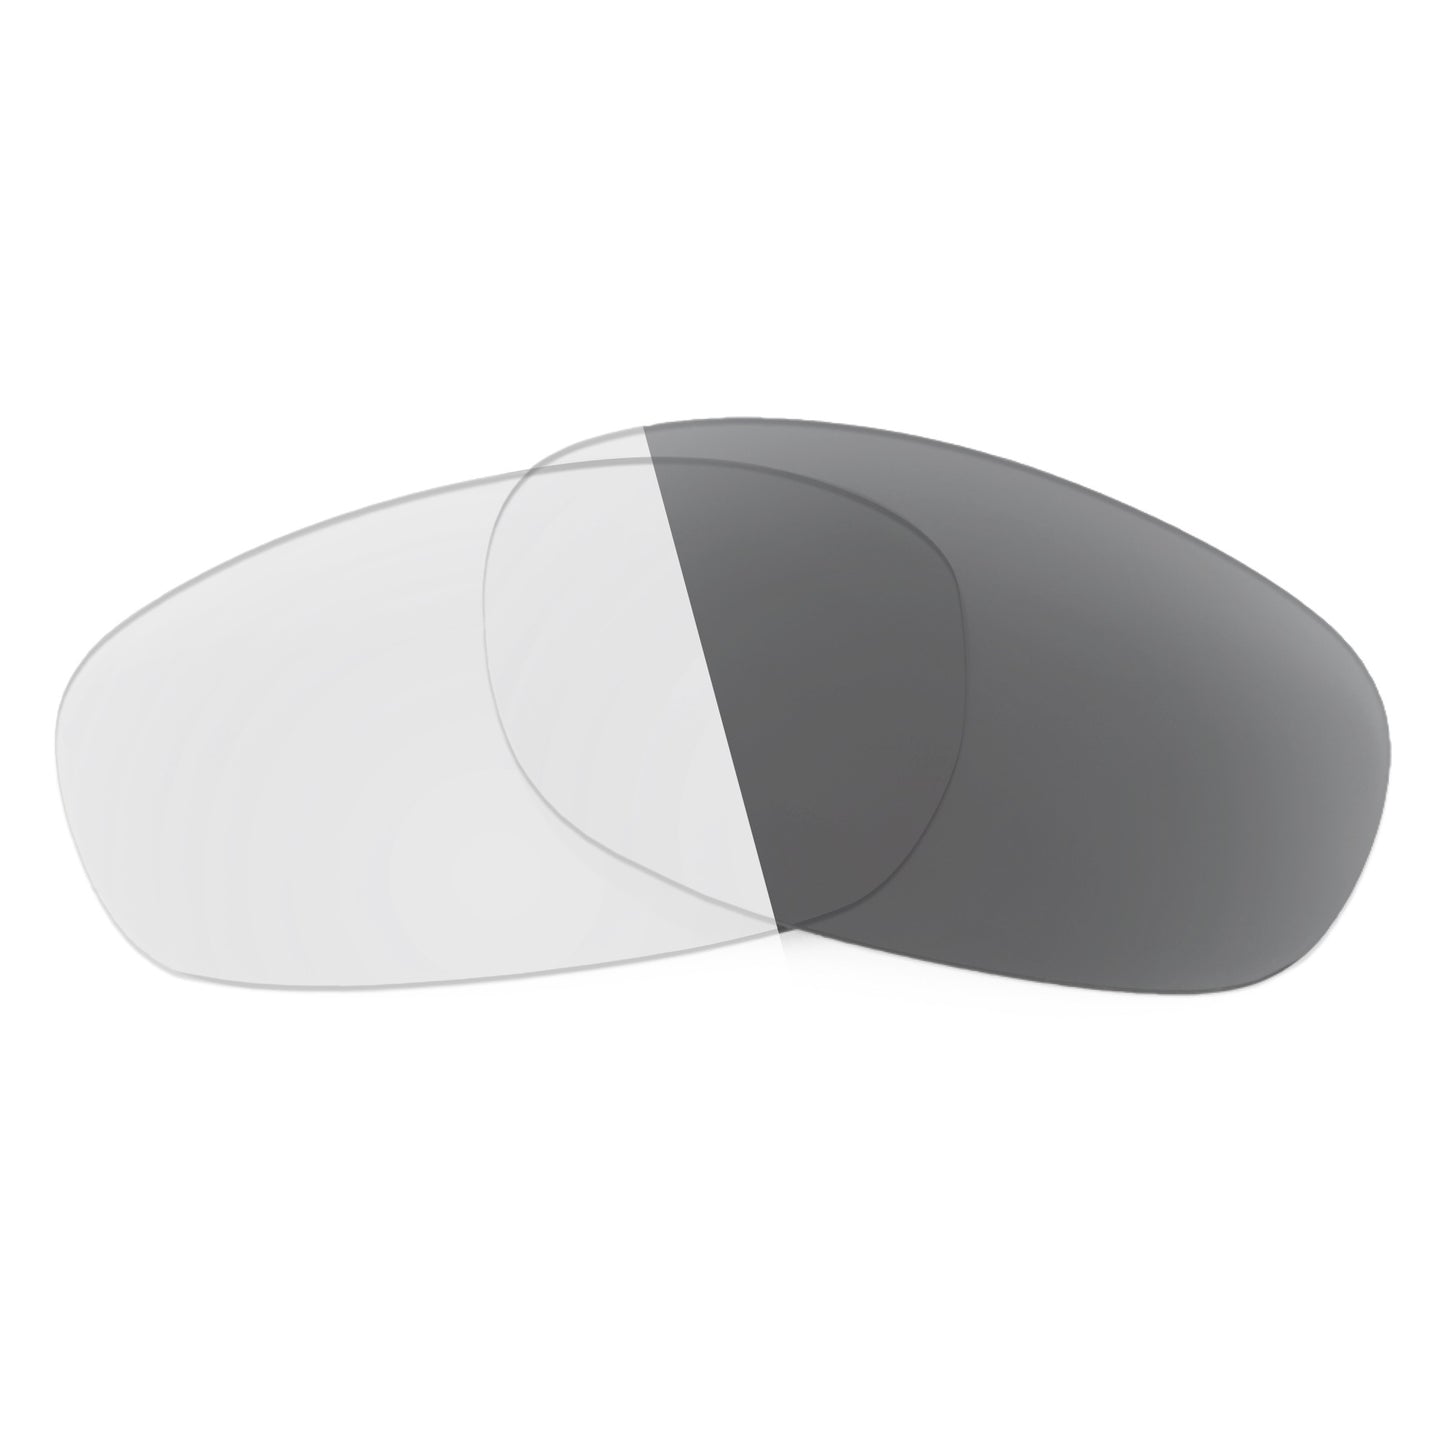 Revant replacement lenses for Ray-Ban RB3671 60mm Non-Polarized Adapt Gray Photochromic